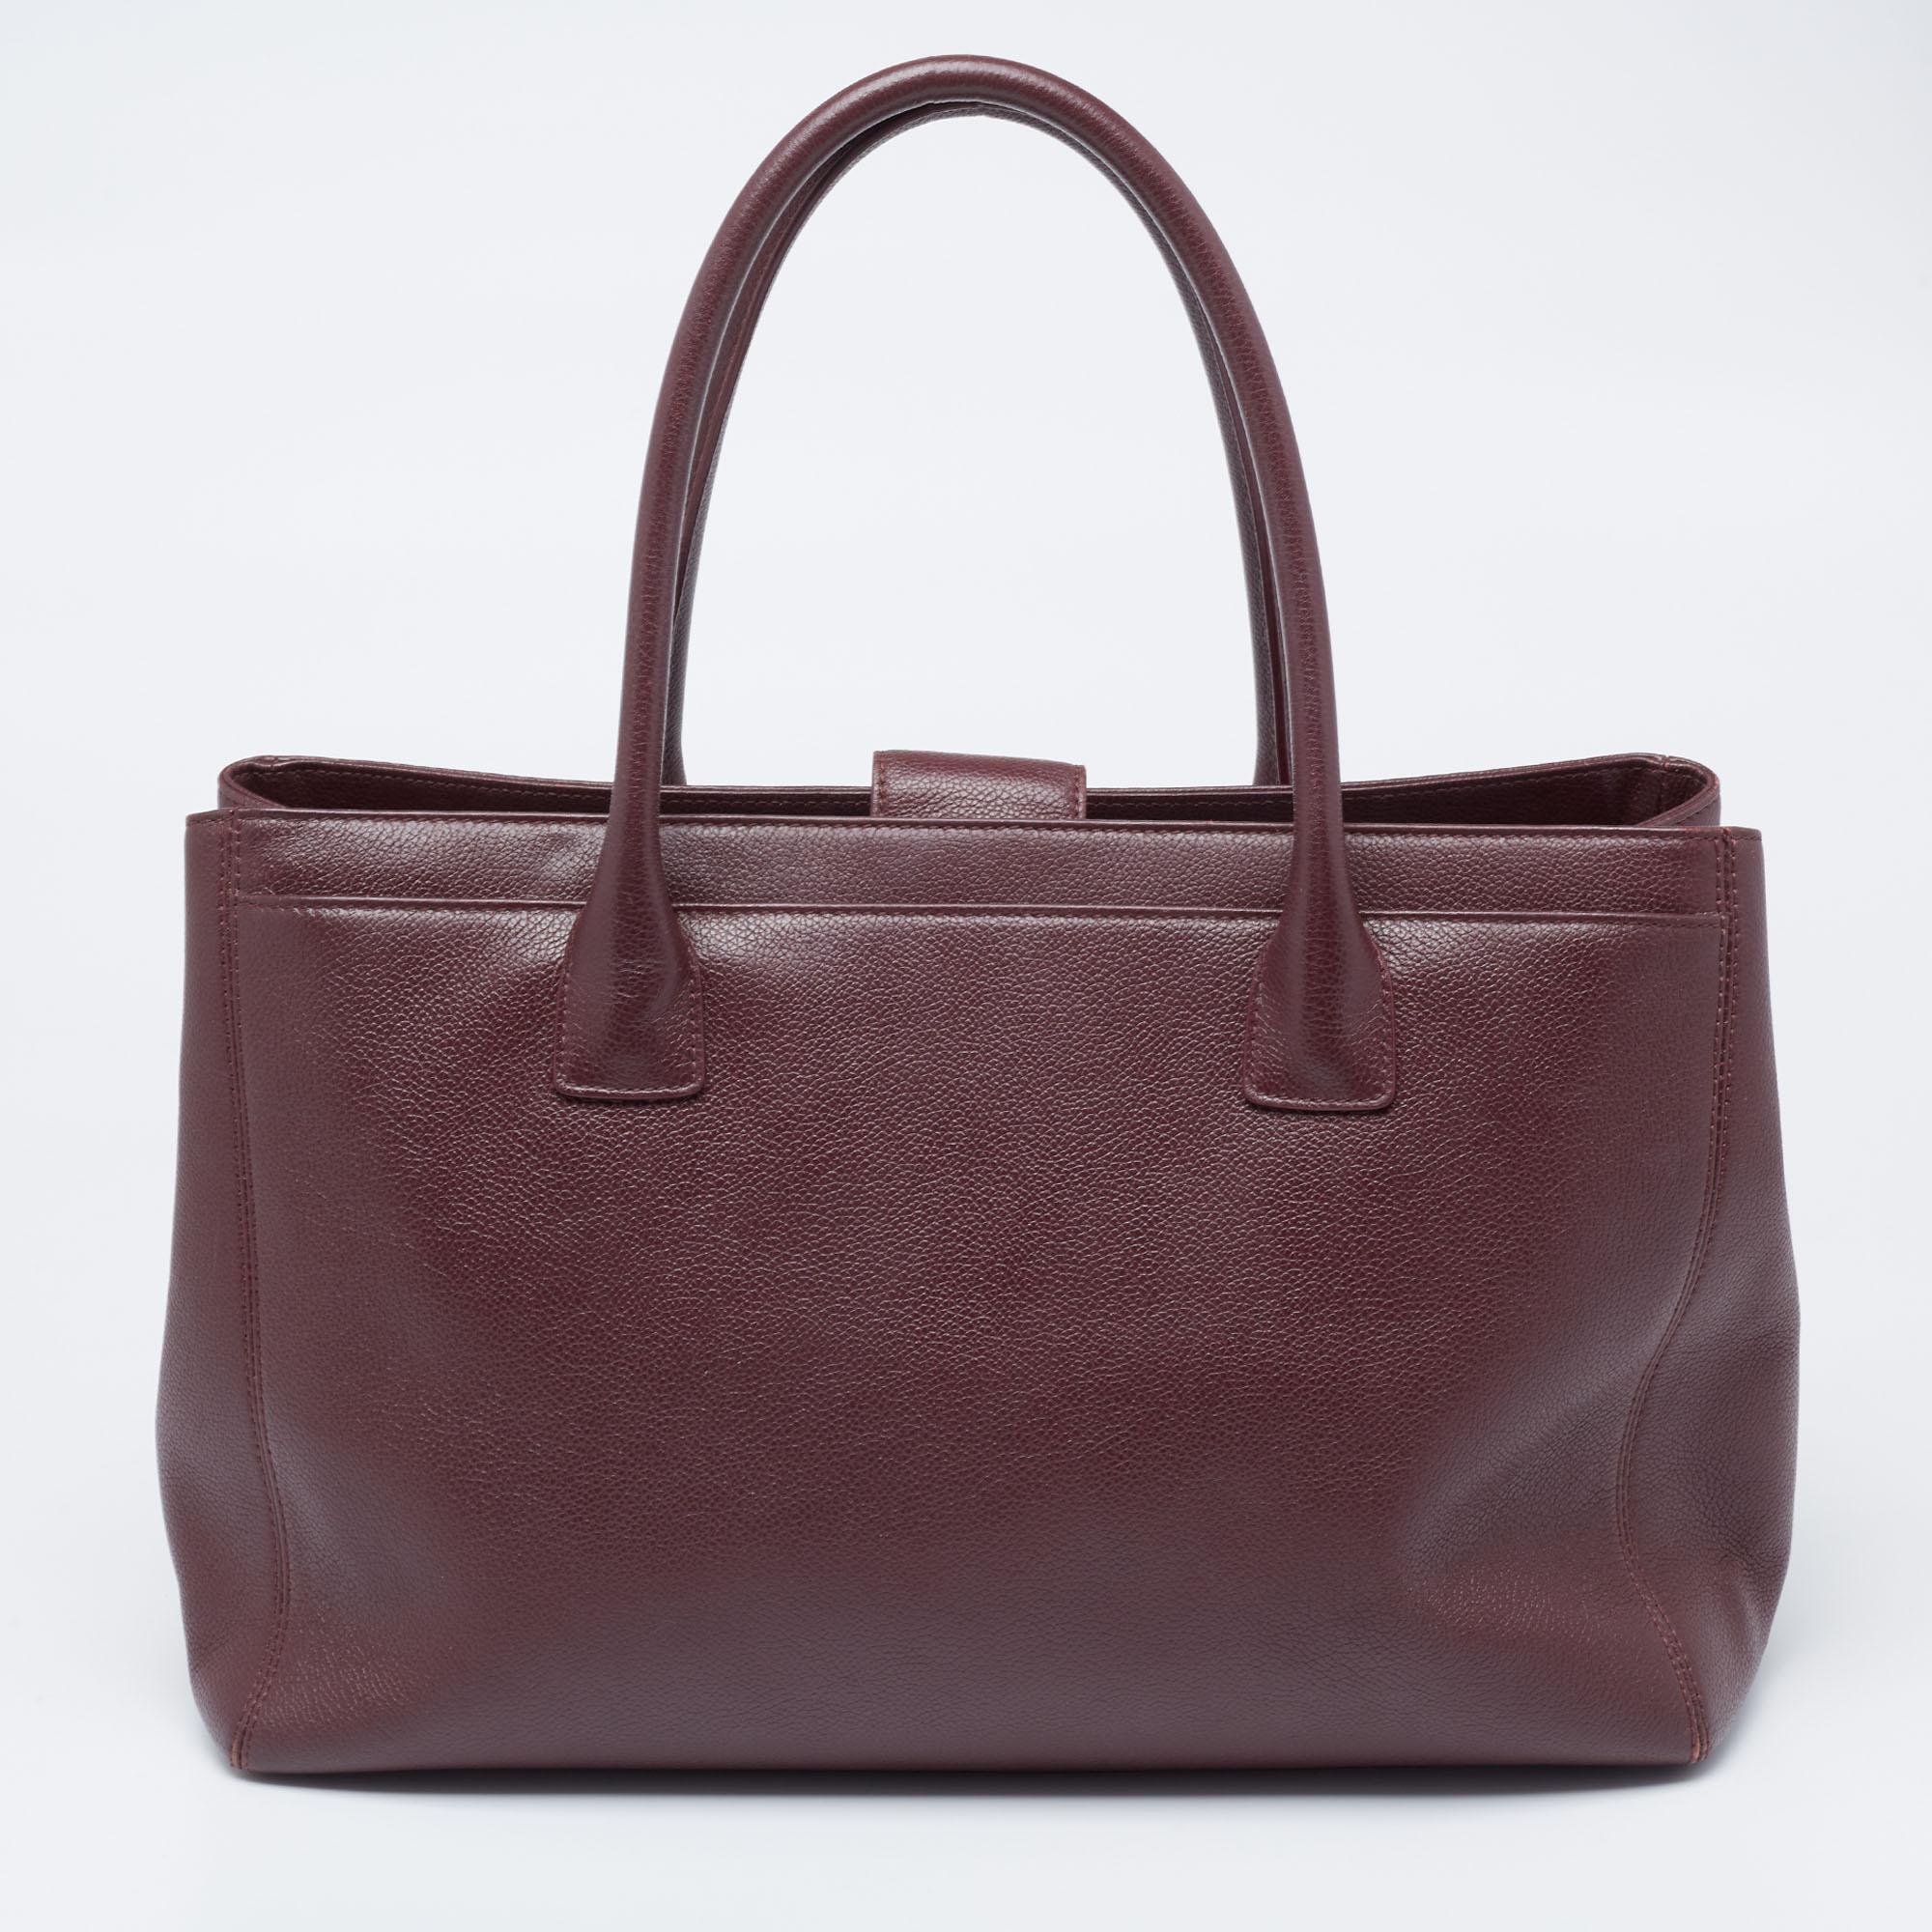 This Cerf tote from Chanel is a perfect blend of function and style. It features a burgundy leather construction that is enhanced with a metal CC logo on the front and dual top handles. It is equipped with a spacious interior that can easily hold